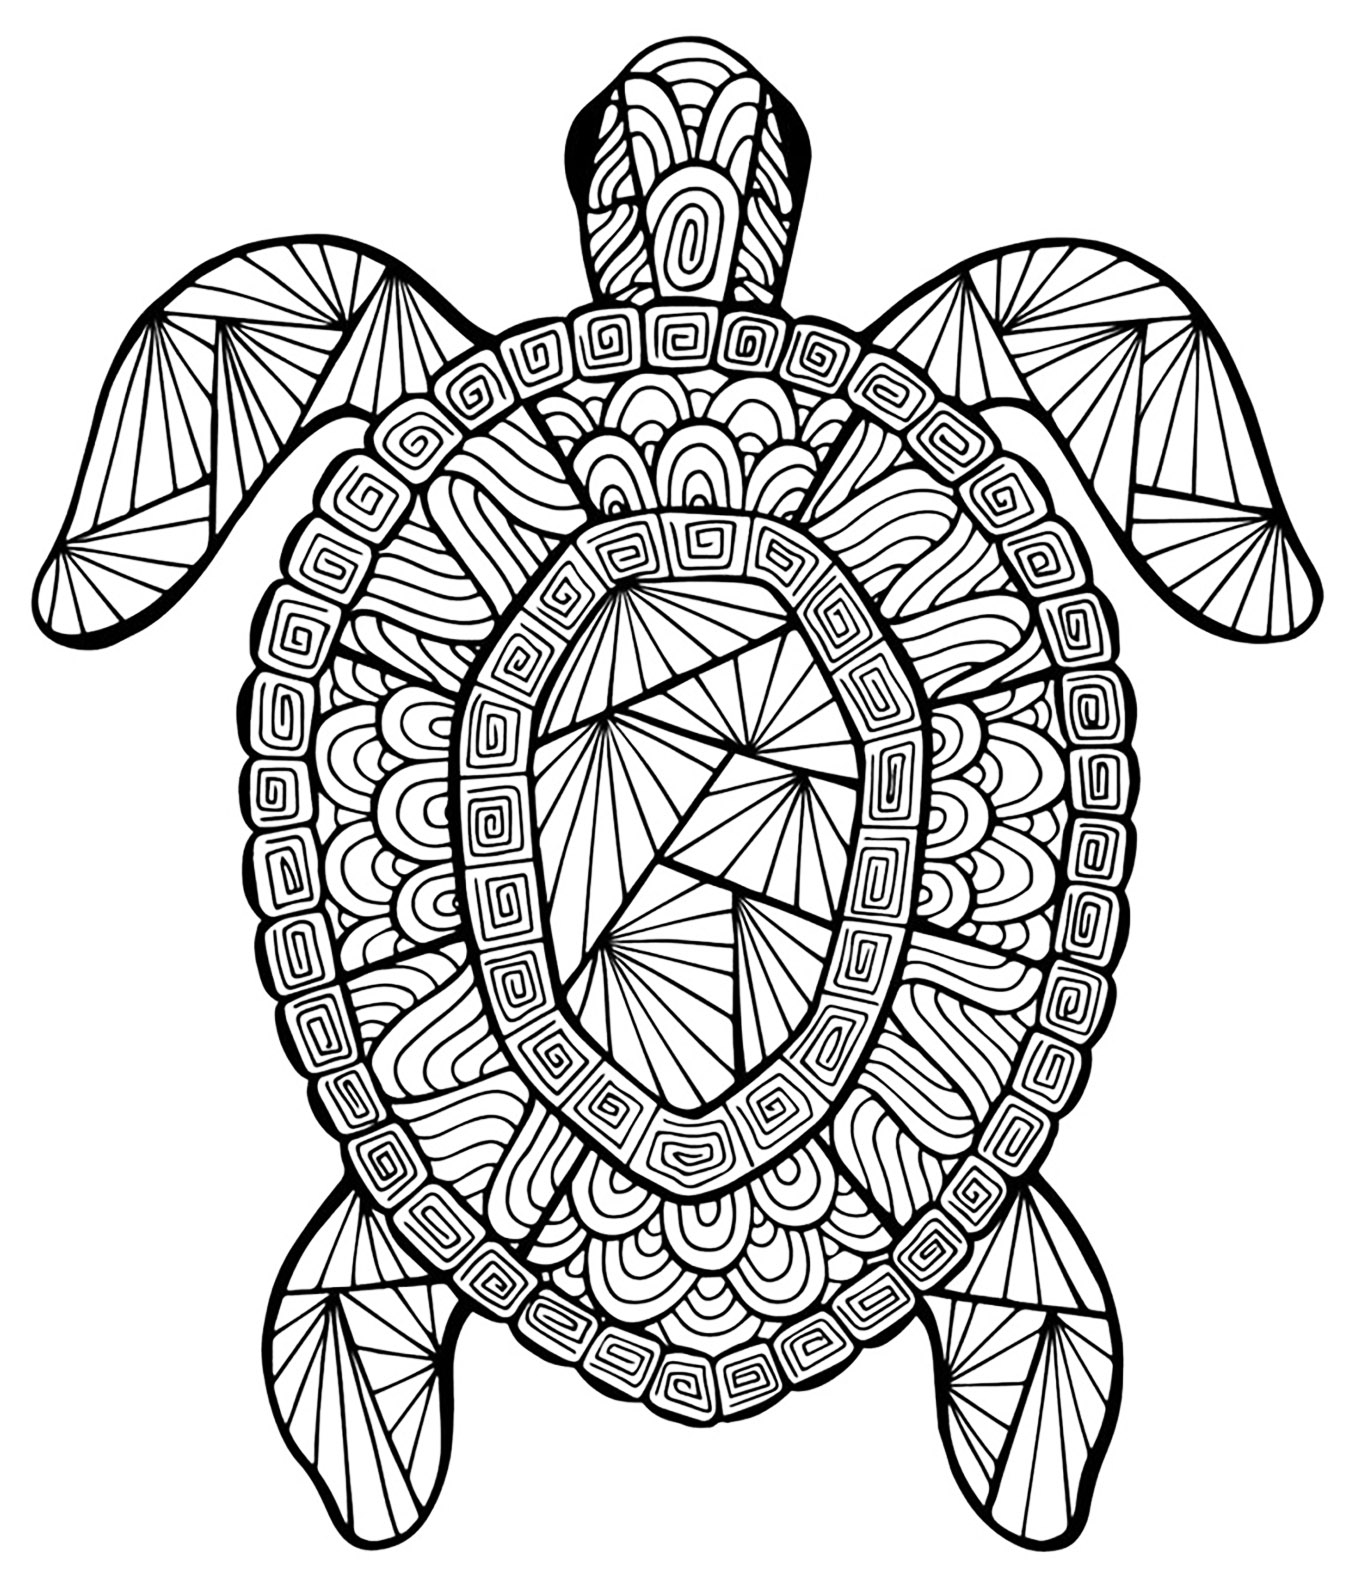 Incredible turtle - Turtles Adult Coloring Pages